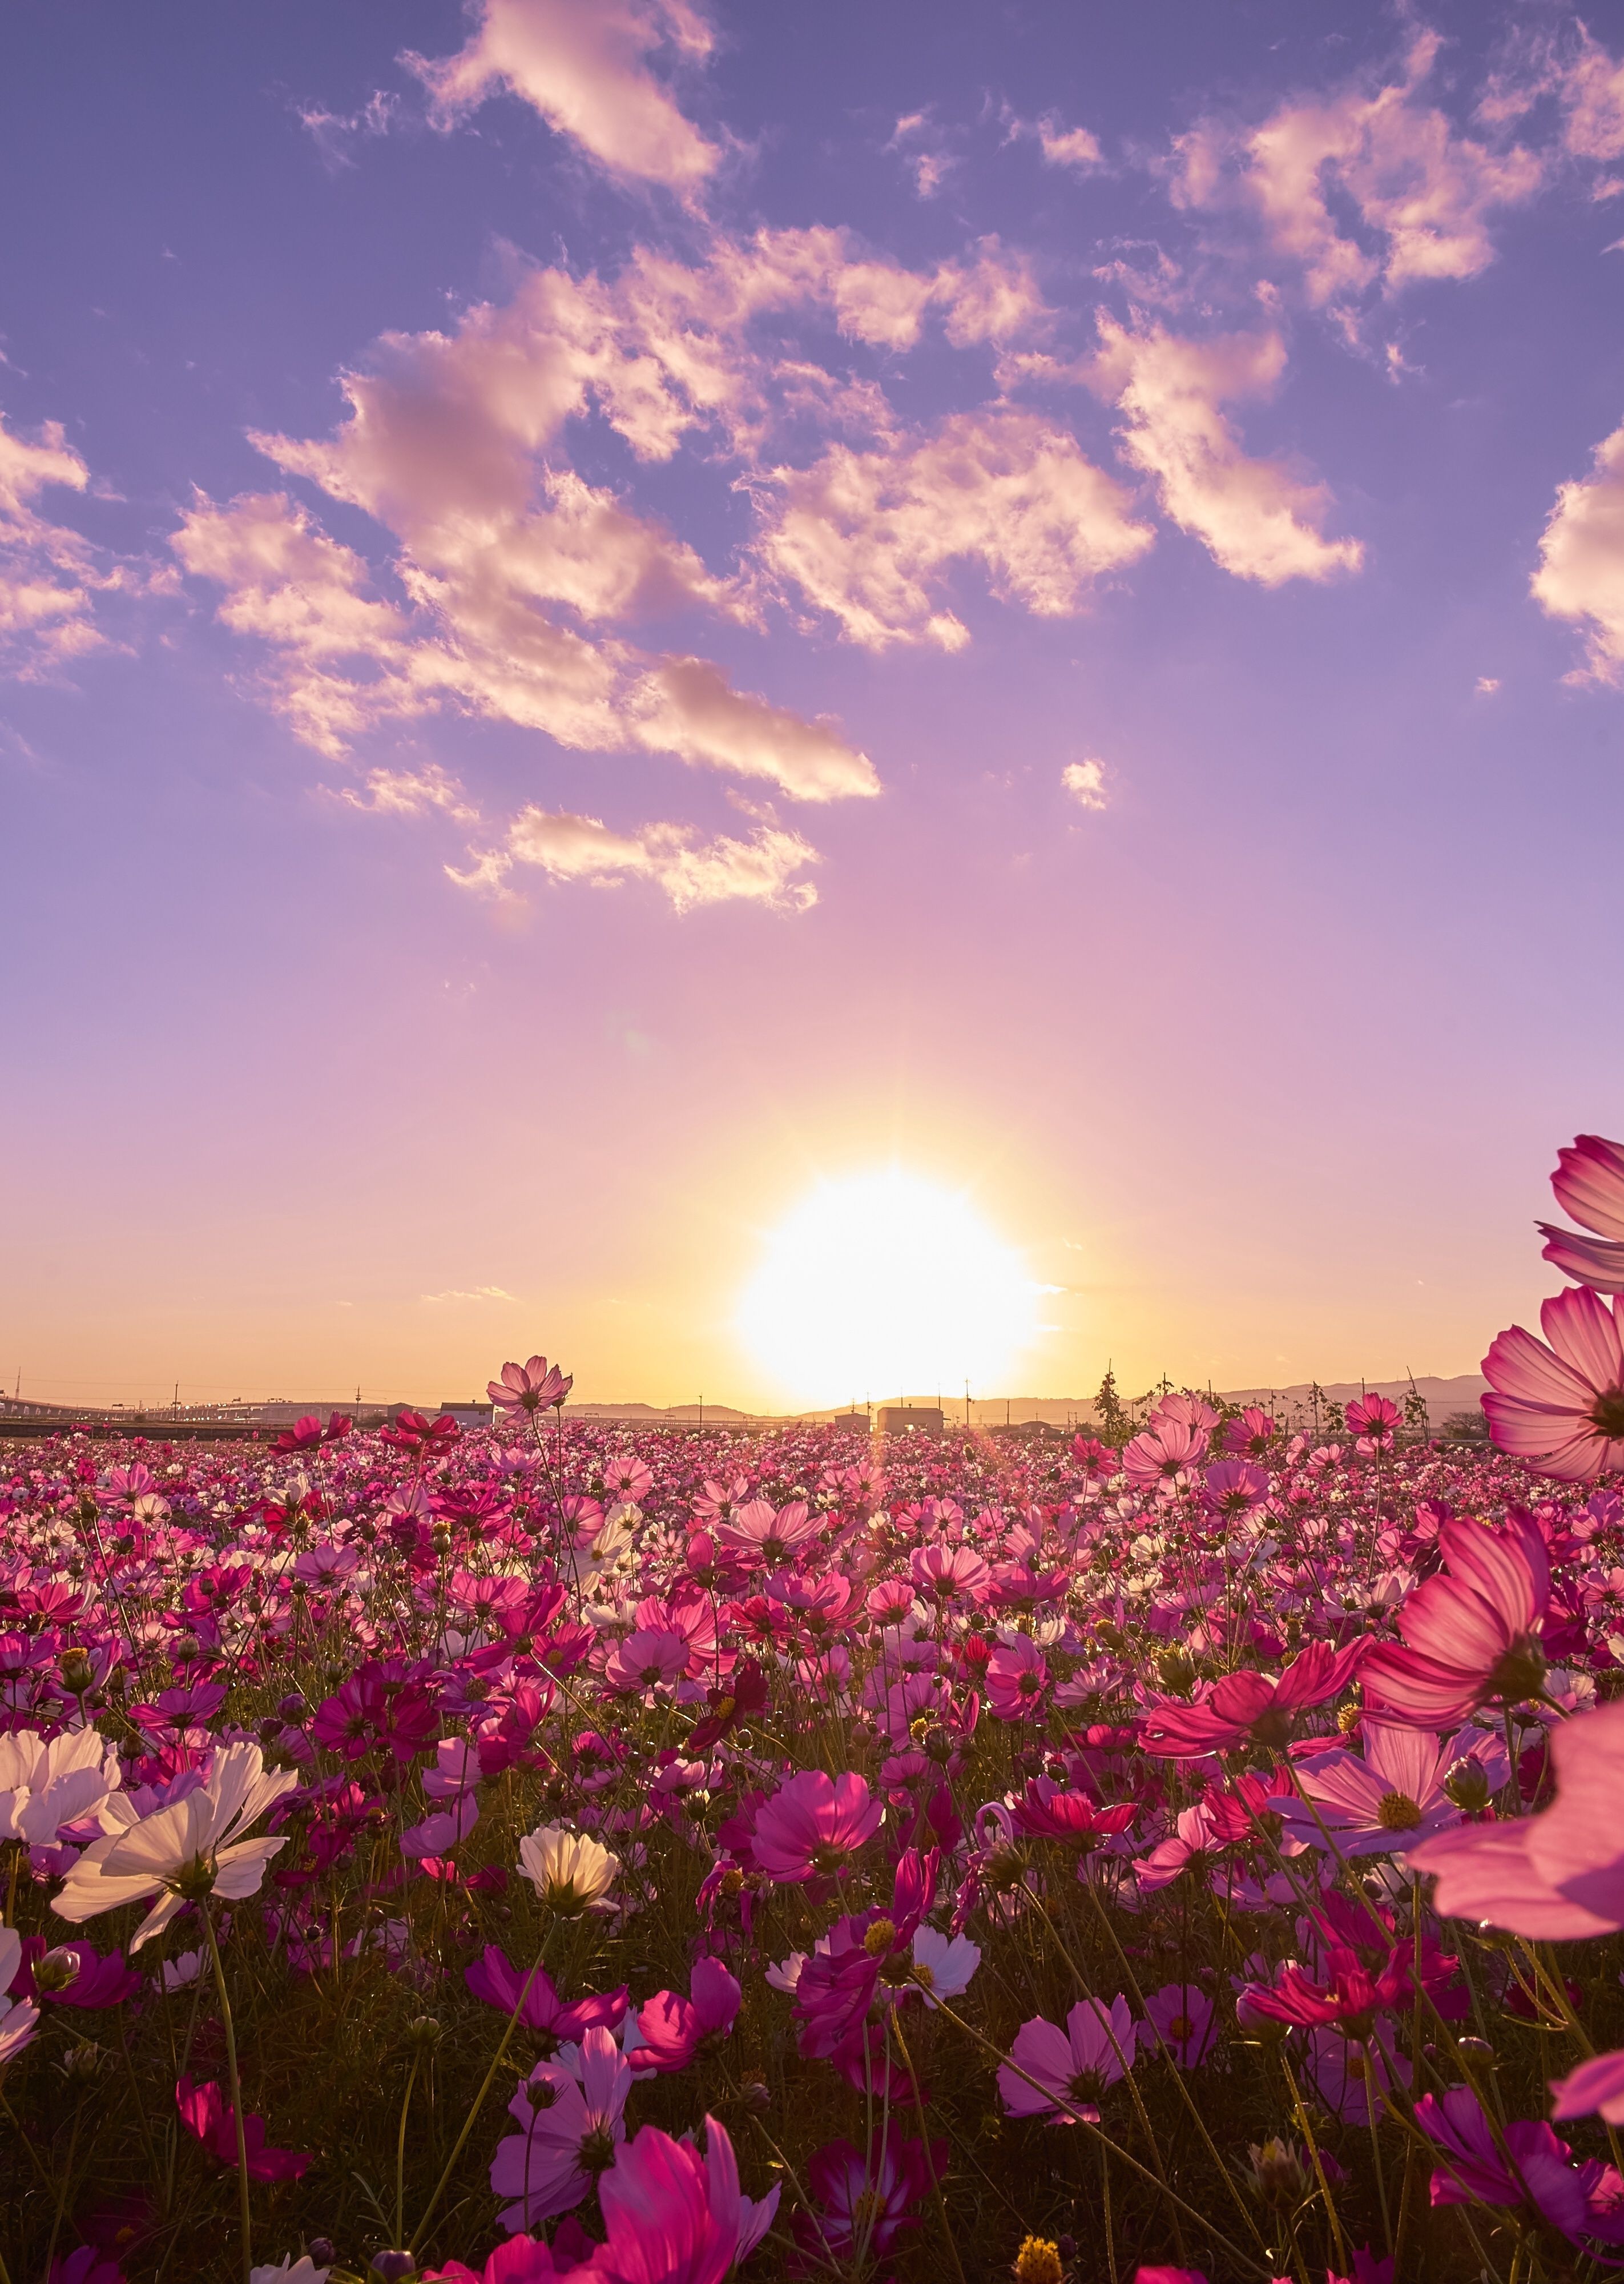 A field of flowers with the sun setting in background - Sunrise